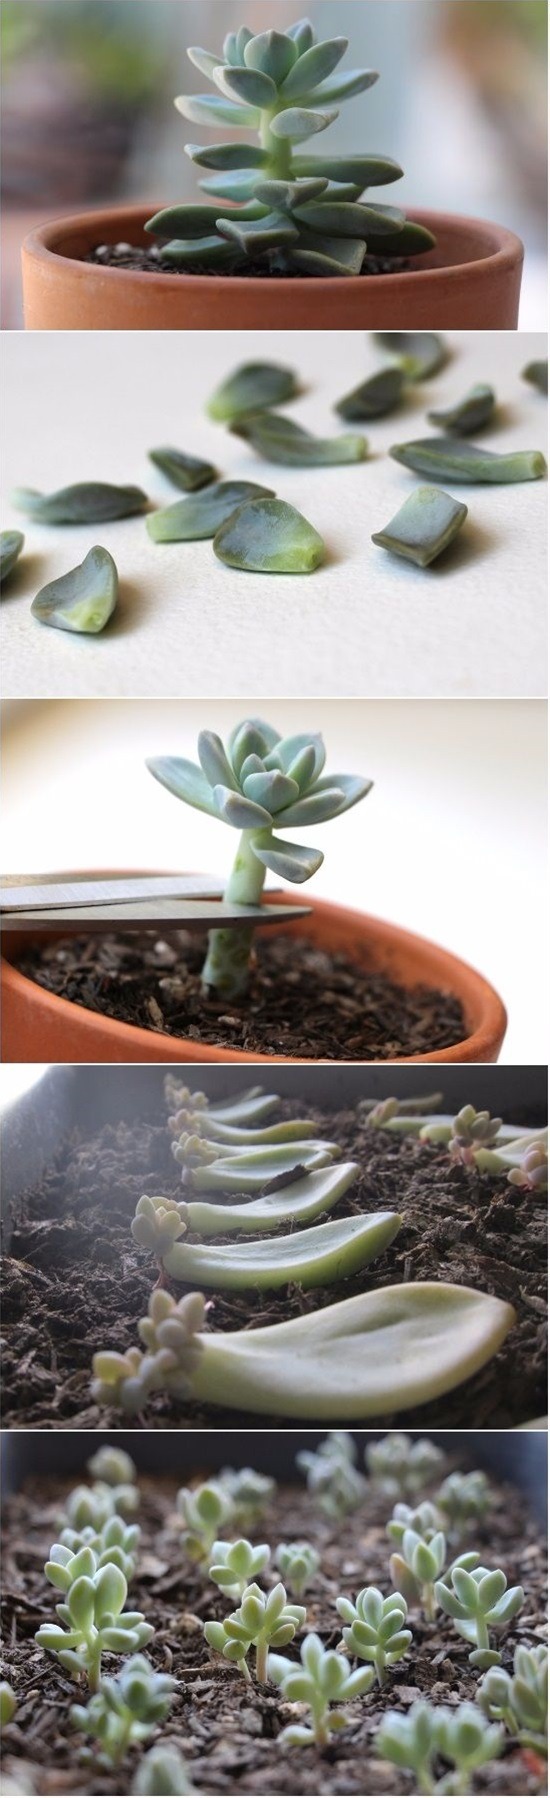 dizzymaiden:  Propagate Succulents From Leaves - start by removing the lower leaves